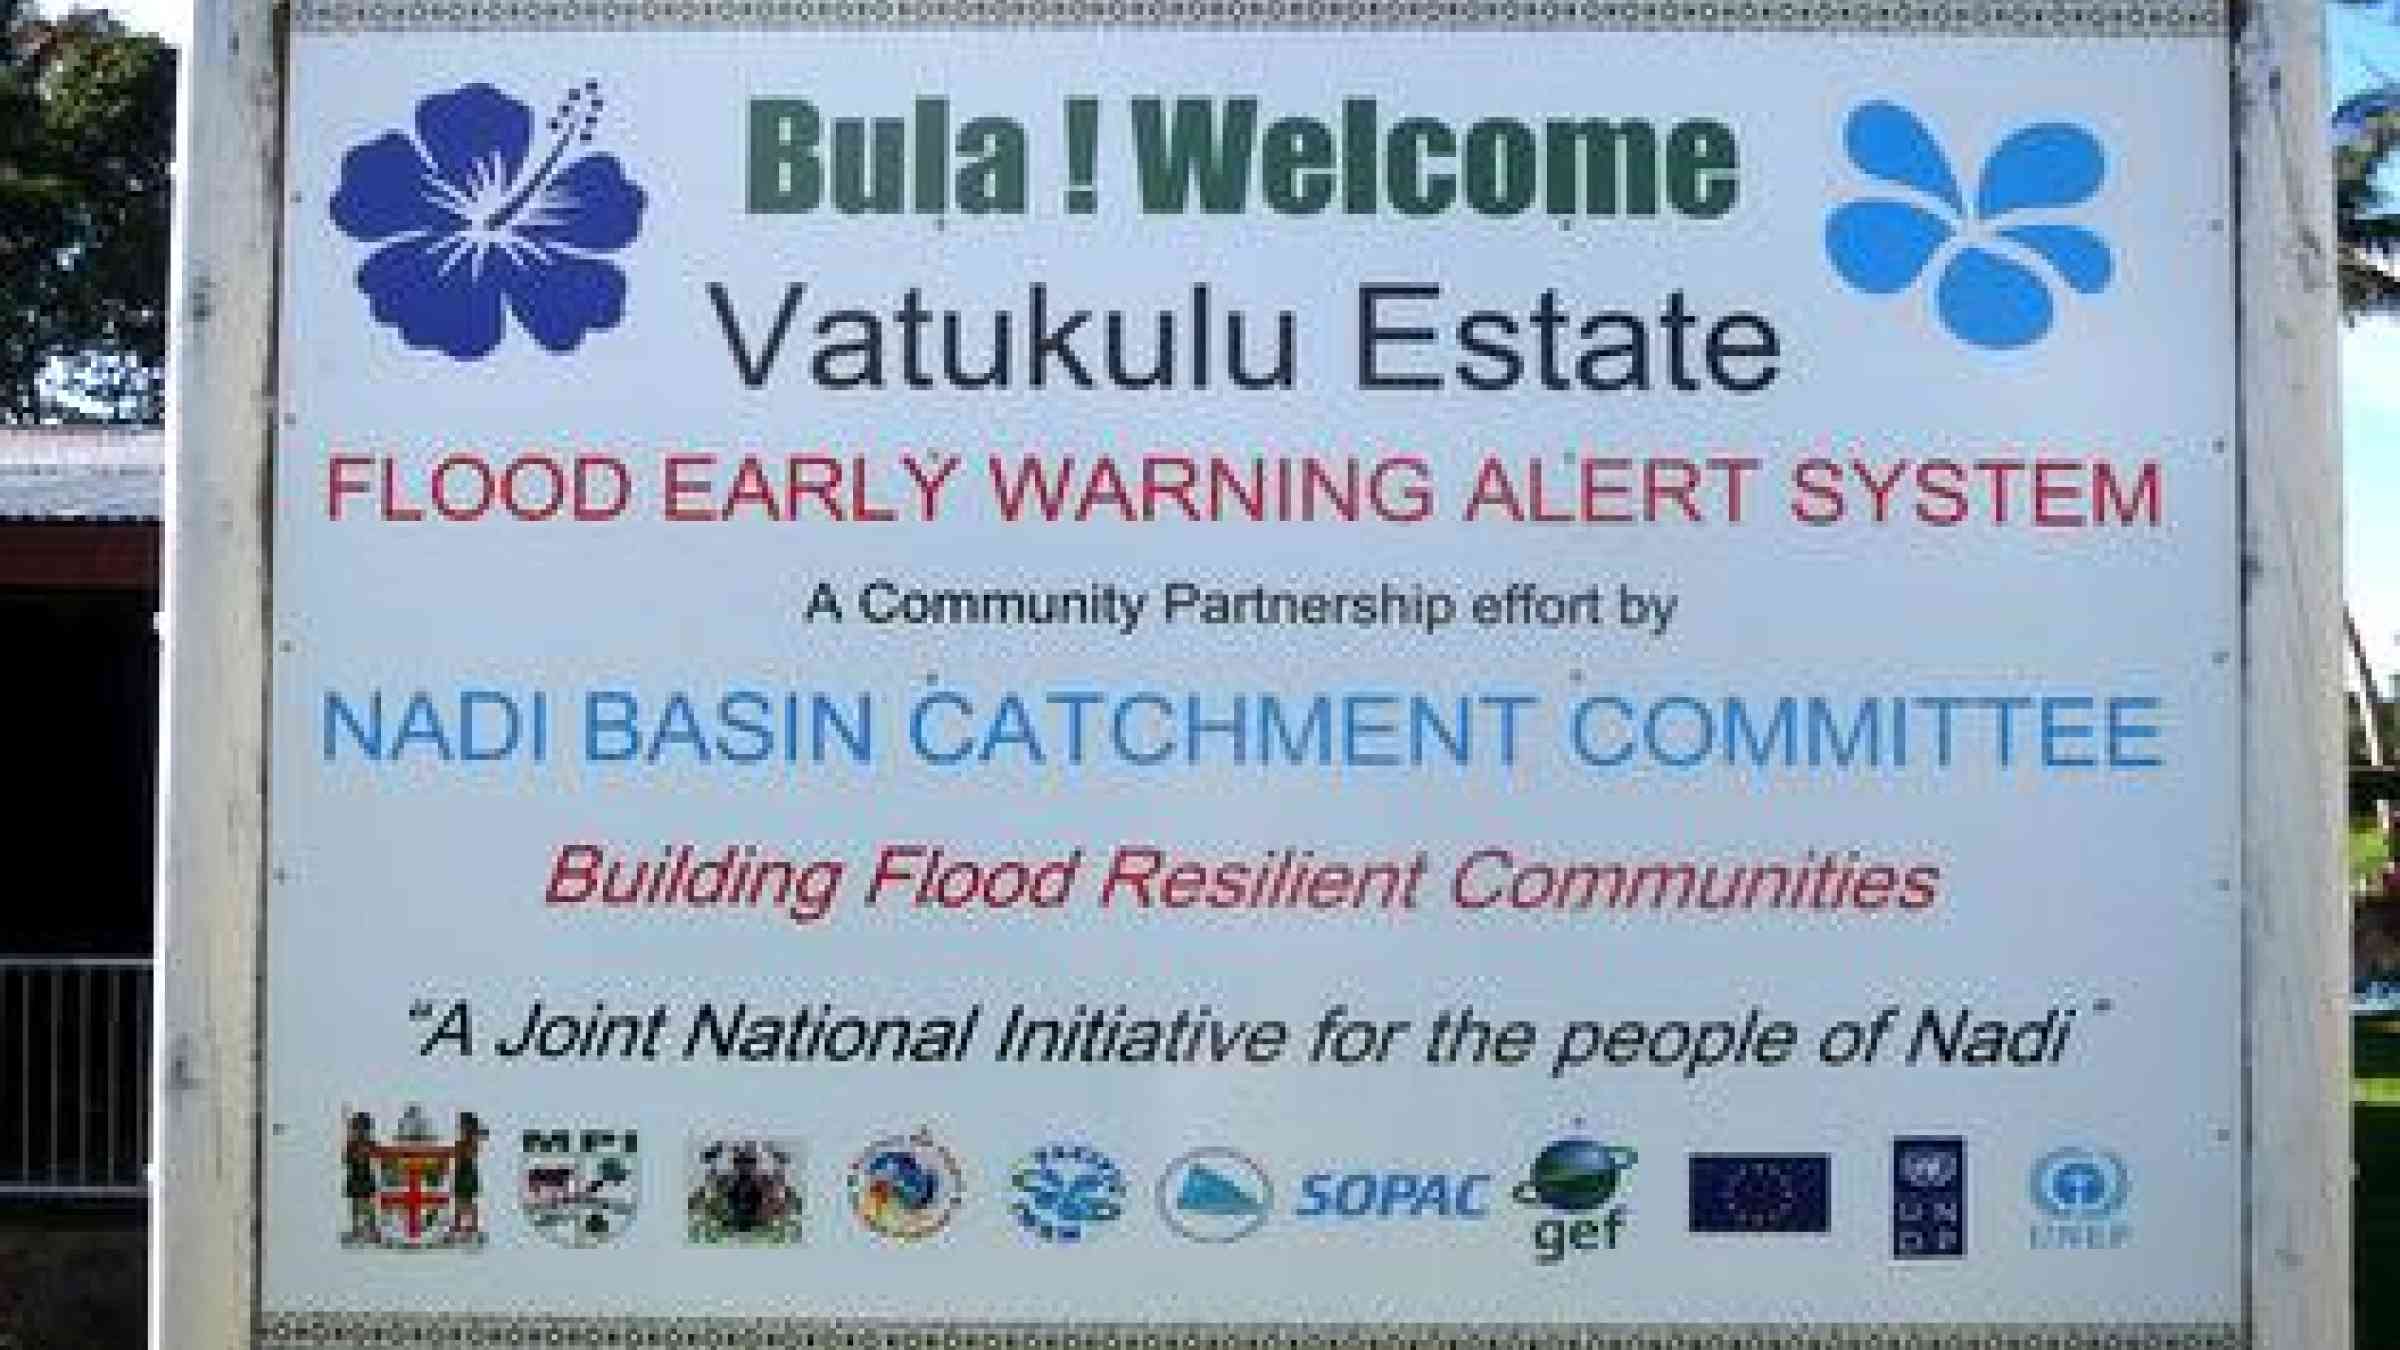 Integrated action and partnerships with communities is a means to strengthen safety and resilience of vulnerable islanders. Vatukulu in Western Fiji is proud of its early warning system and thanks its various partners.